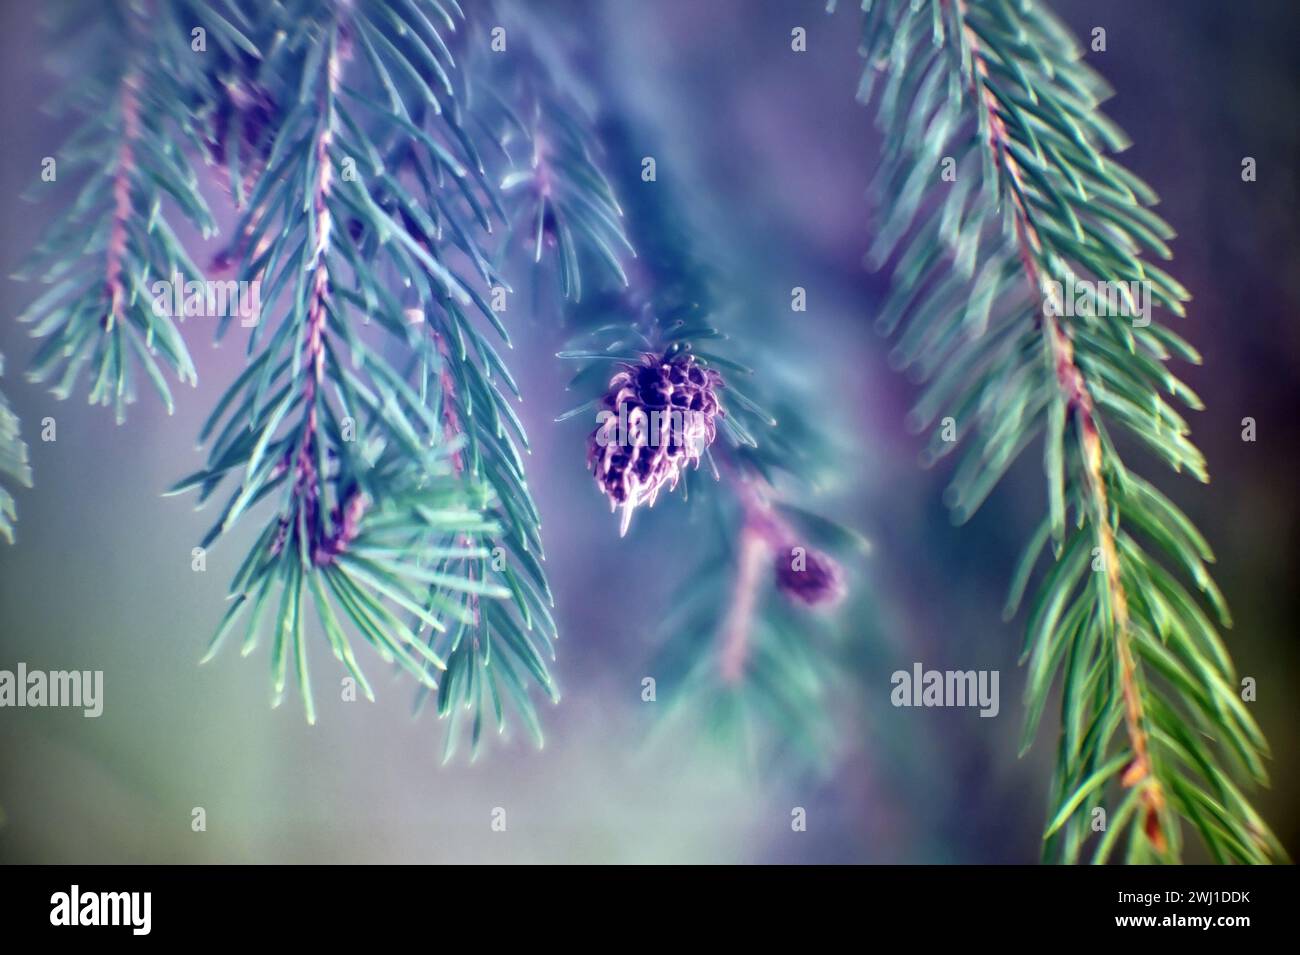 Spruce branch on a tree in winter, close-up Stock Photo